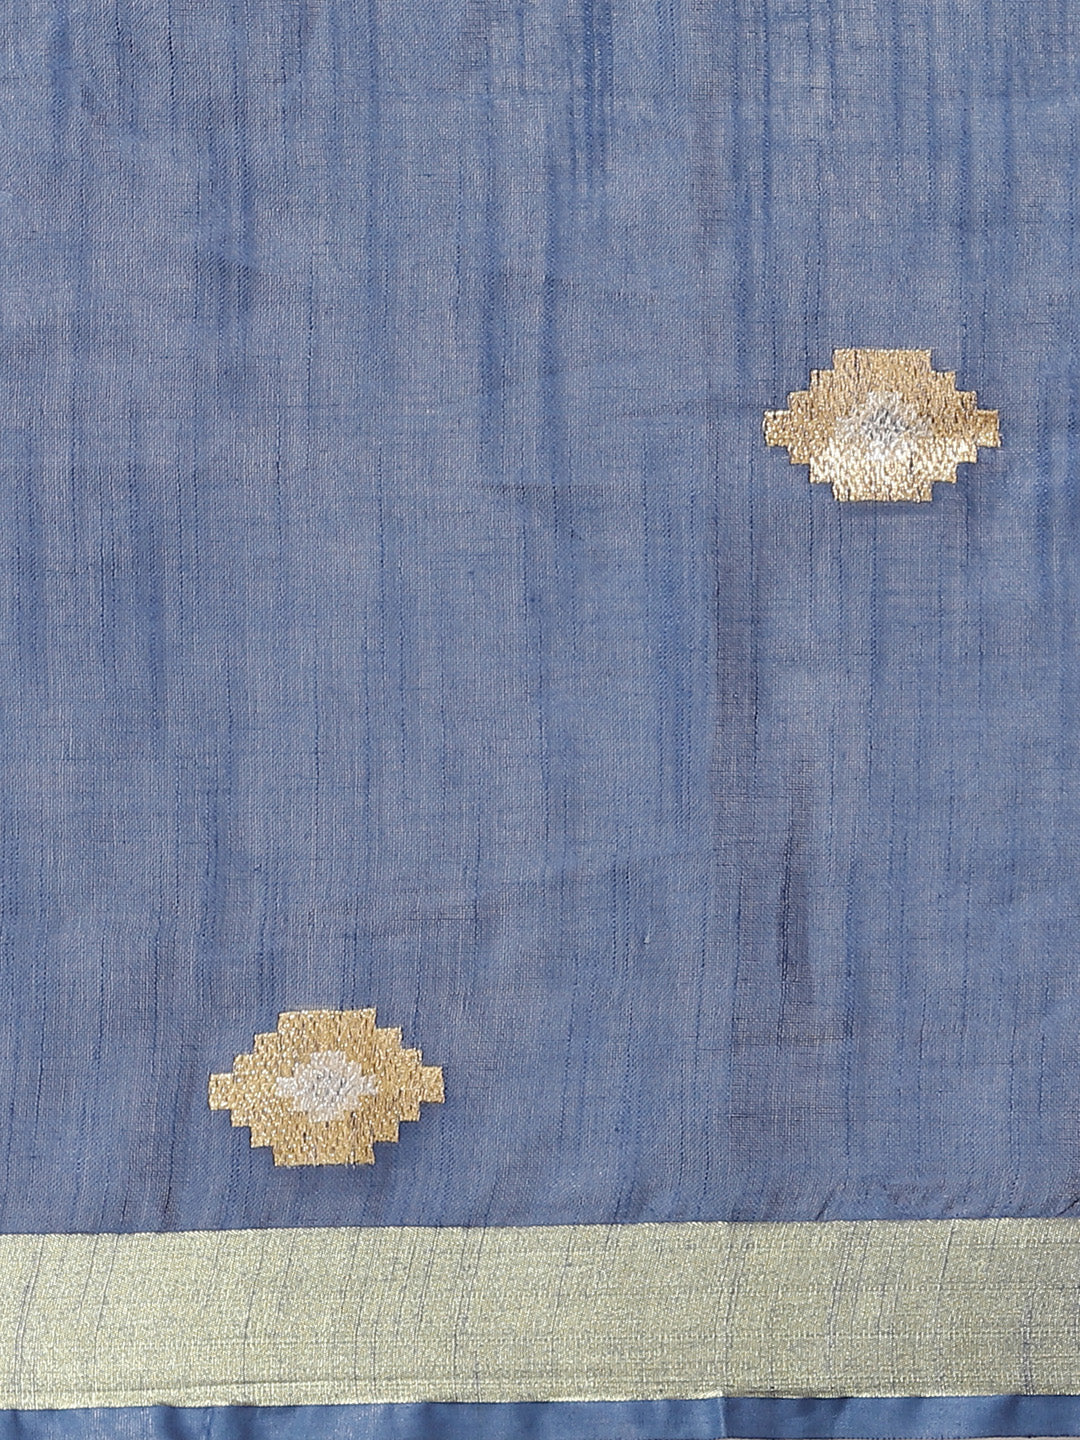 Blue and Gold, Kalakari India Linen Woven Saree and Blouse ALBGSA0051-Saree-Kalakari India-ALBGSA0051-Cotton, Geographical Indication, Hand Crafted, Heritage Prints, Linen, Natural Dyes, Red, Sarees, Shibori, Sustainable Fabrics, Woven, Yellow-[Linen,Ethnic,wear,Fashionista,Handloom,Handicraft,Indigo,blockprint,block,print,Cotton,Chanderi,Blue, latest,classy,party,bollywood,trendy,summer,style,traditional,formal,elegant,unique,style,hand,block,print, dabu,booti,gift,present,glamorous,affordable,